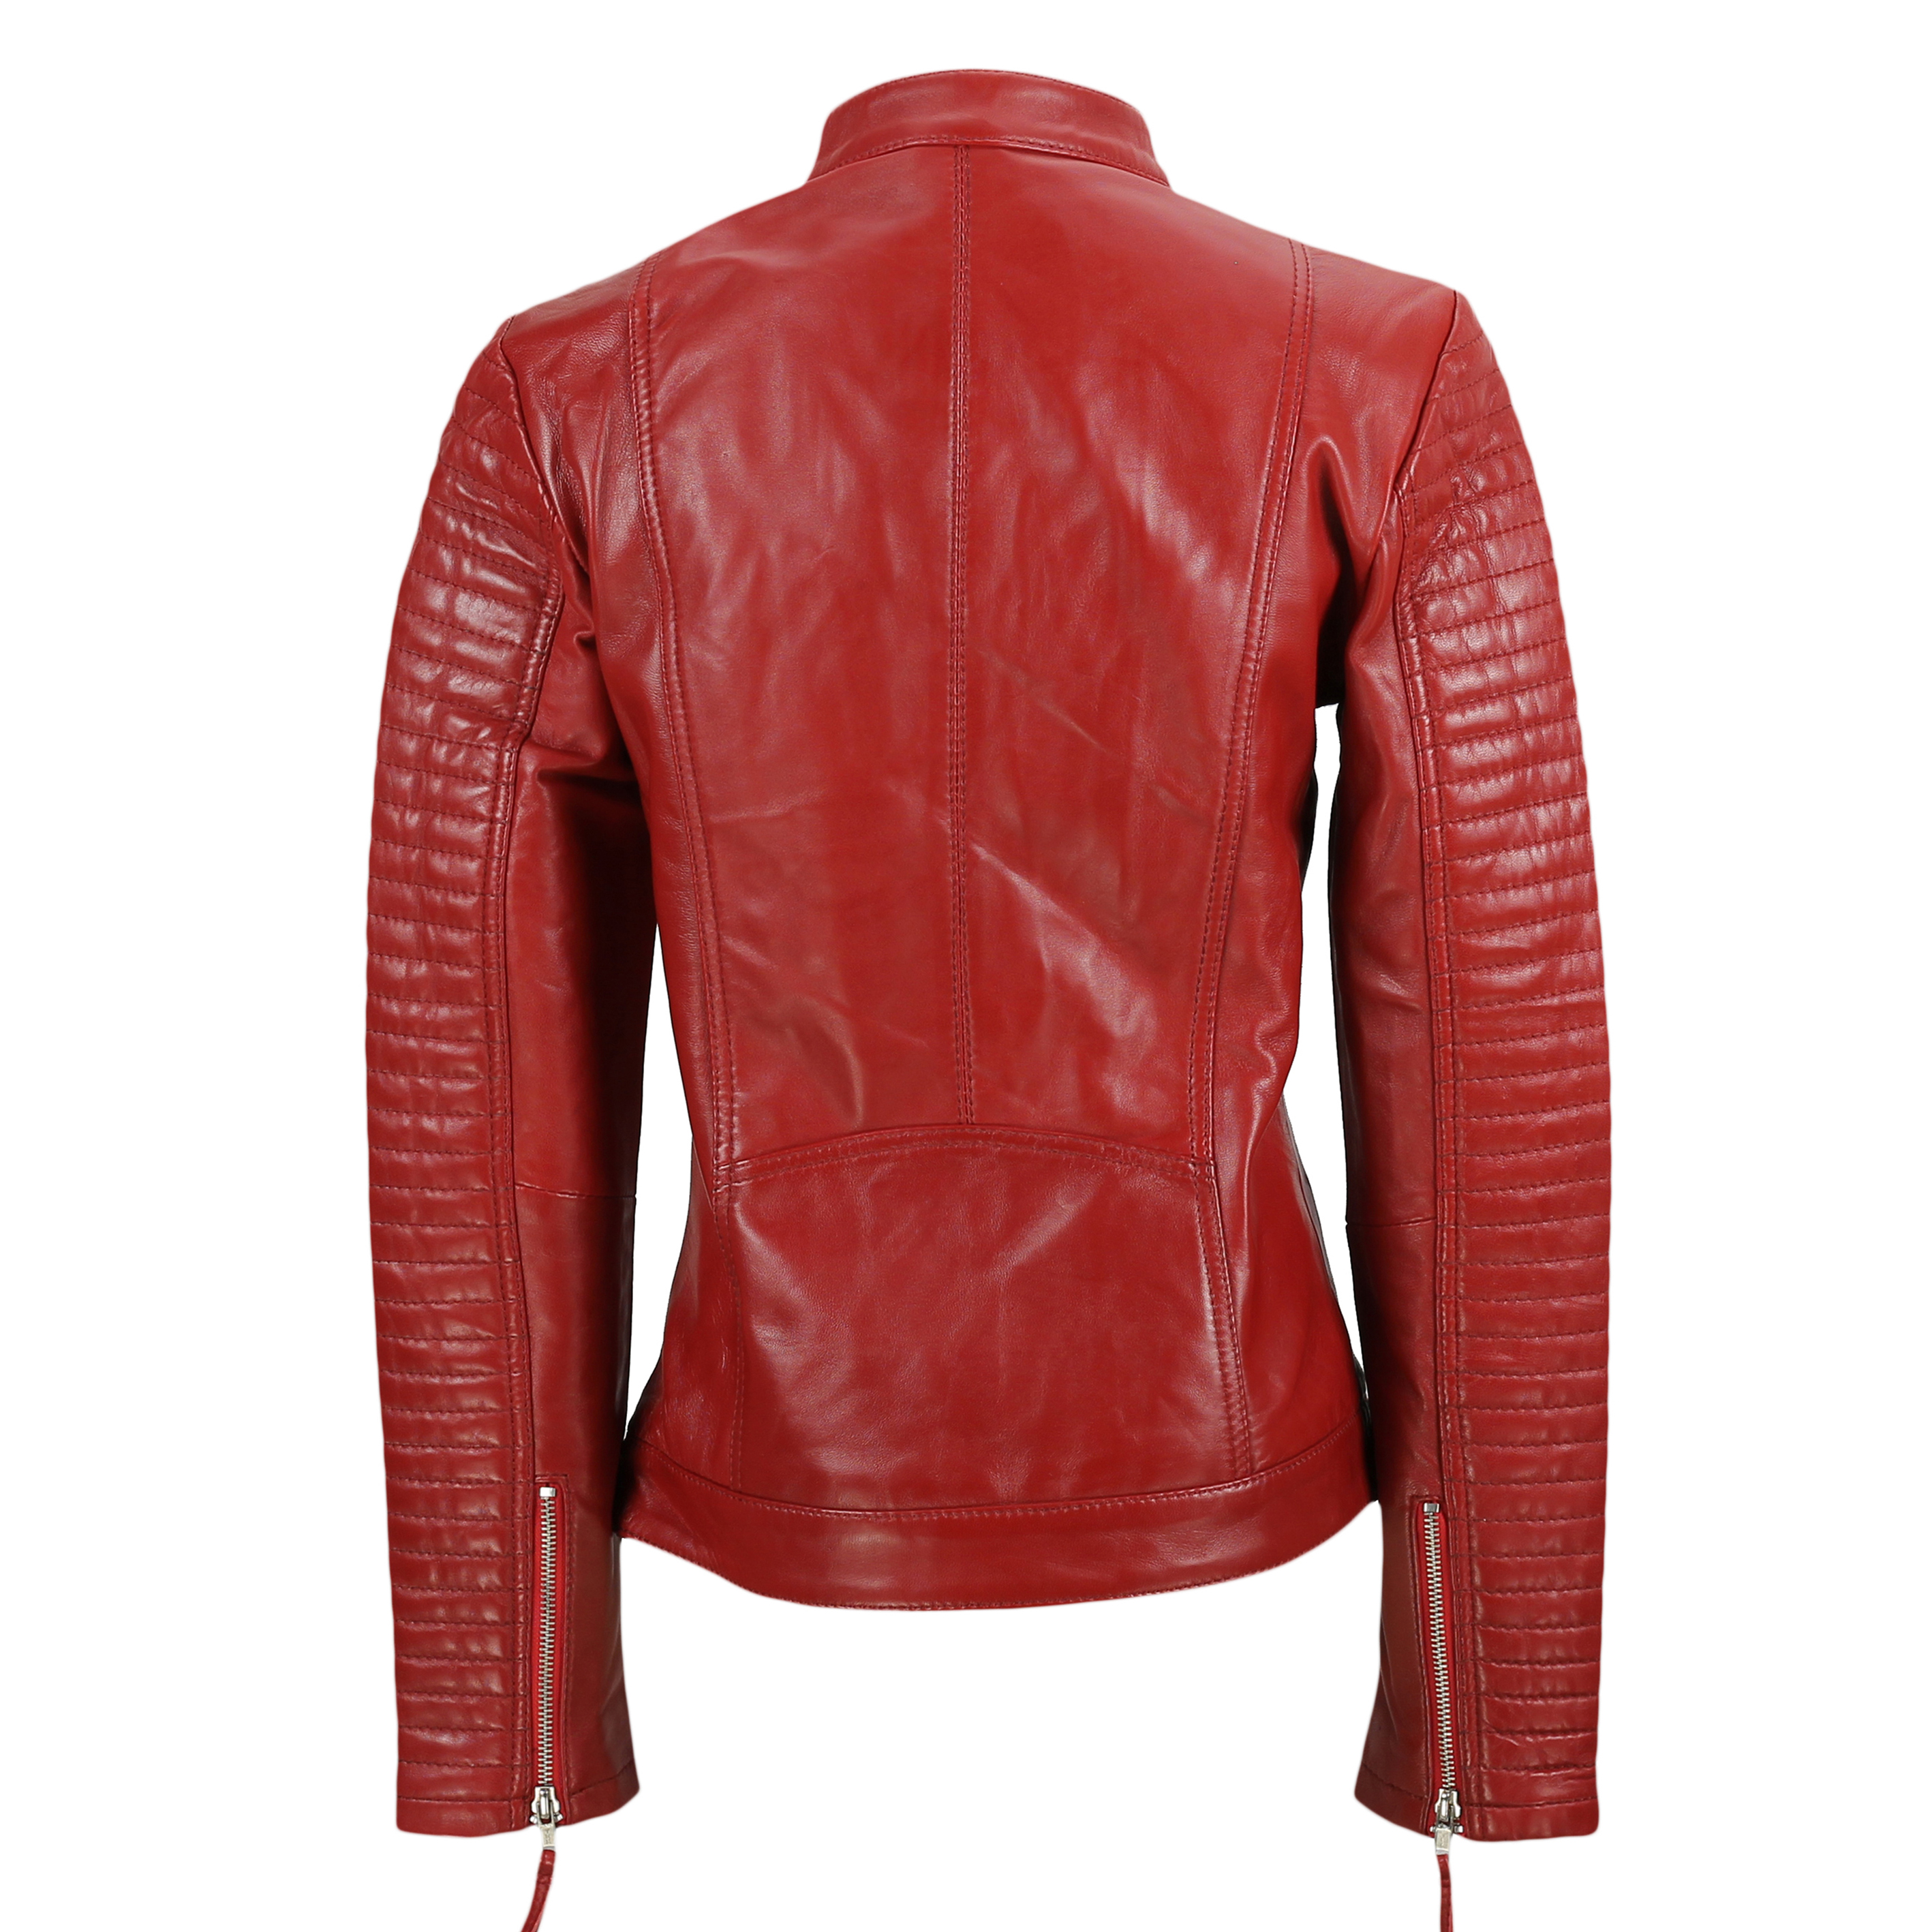 Ladies Women’s Real Soft Leather Biker Jacket Vintage Fitted Style in ...